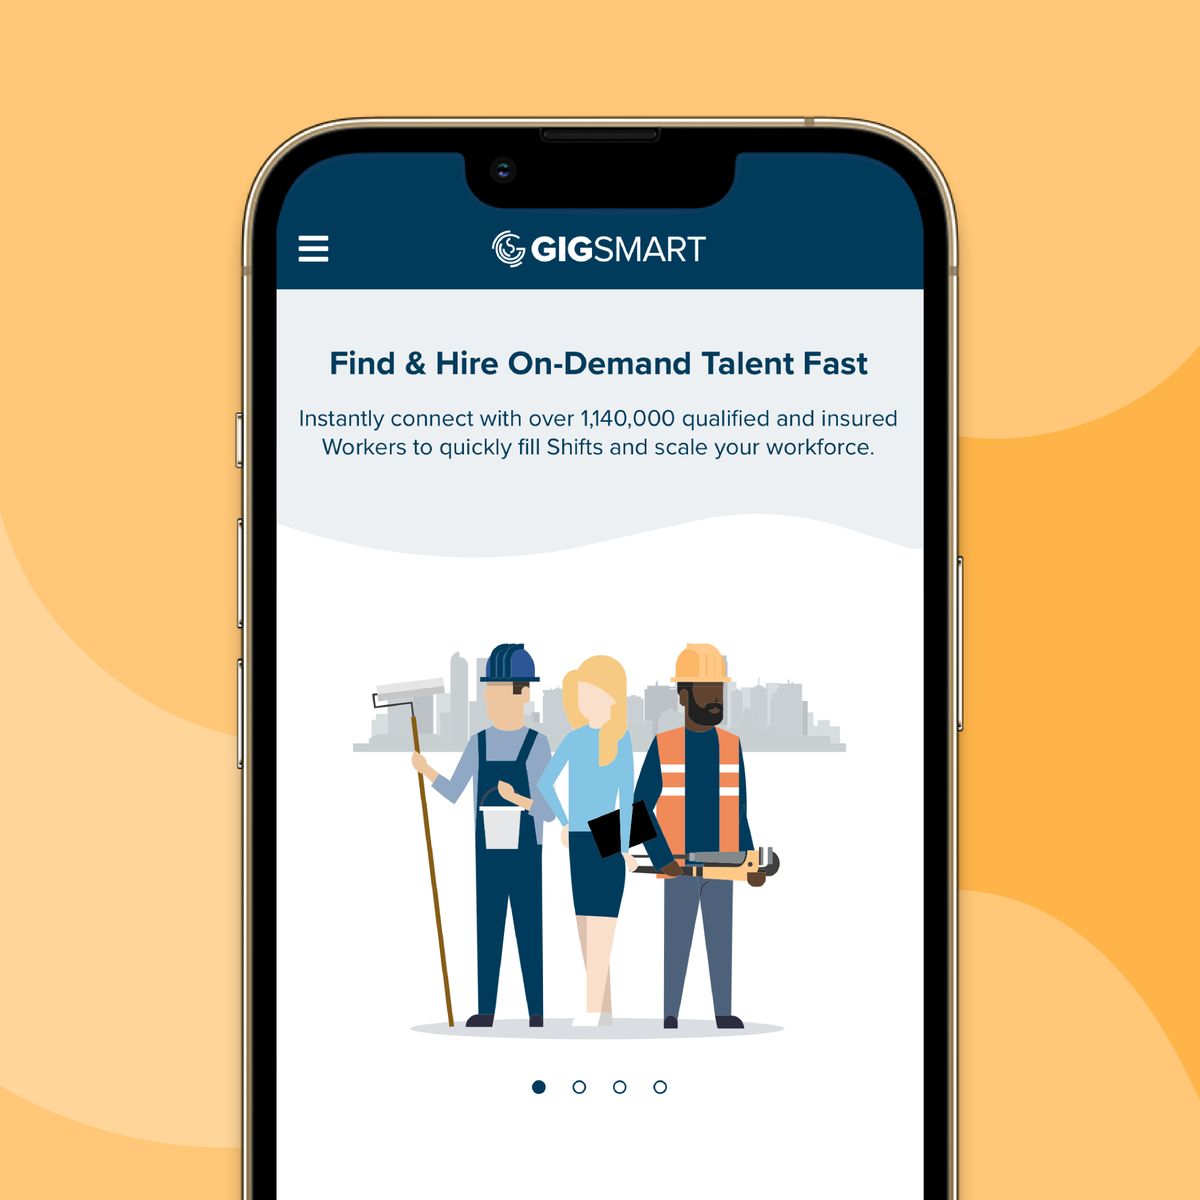 Hire Workers on-demand using GigSmart—no commitment required. Discover, hire, and handle payments all within one convenient platform! Sign up and get started today.